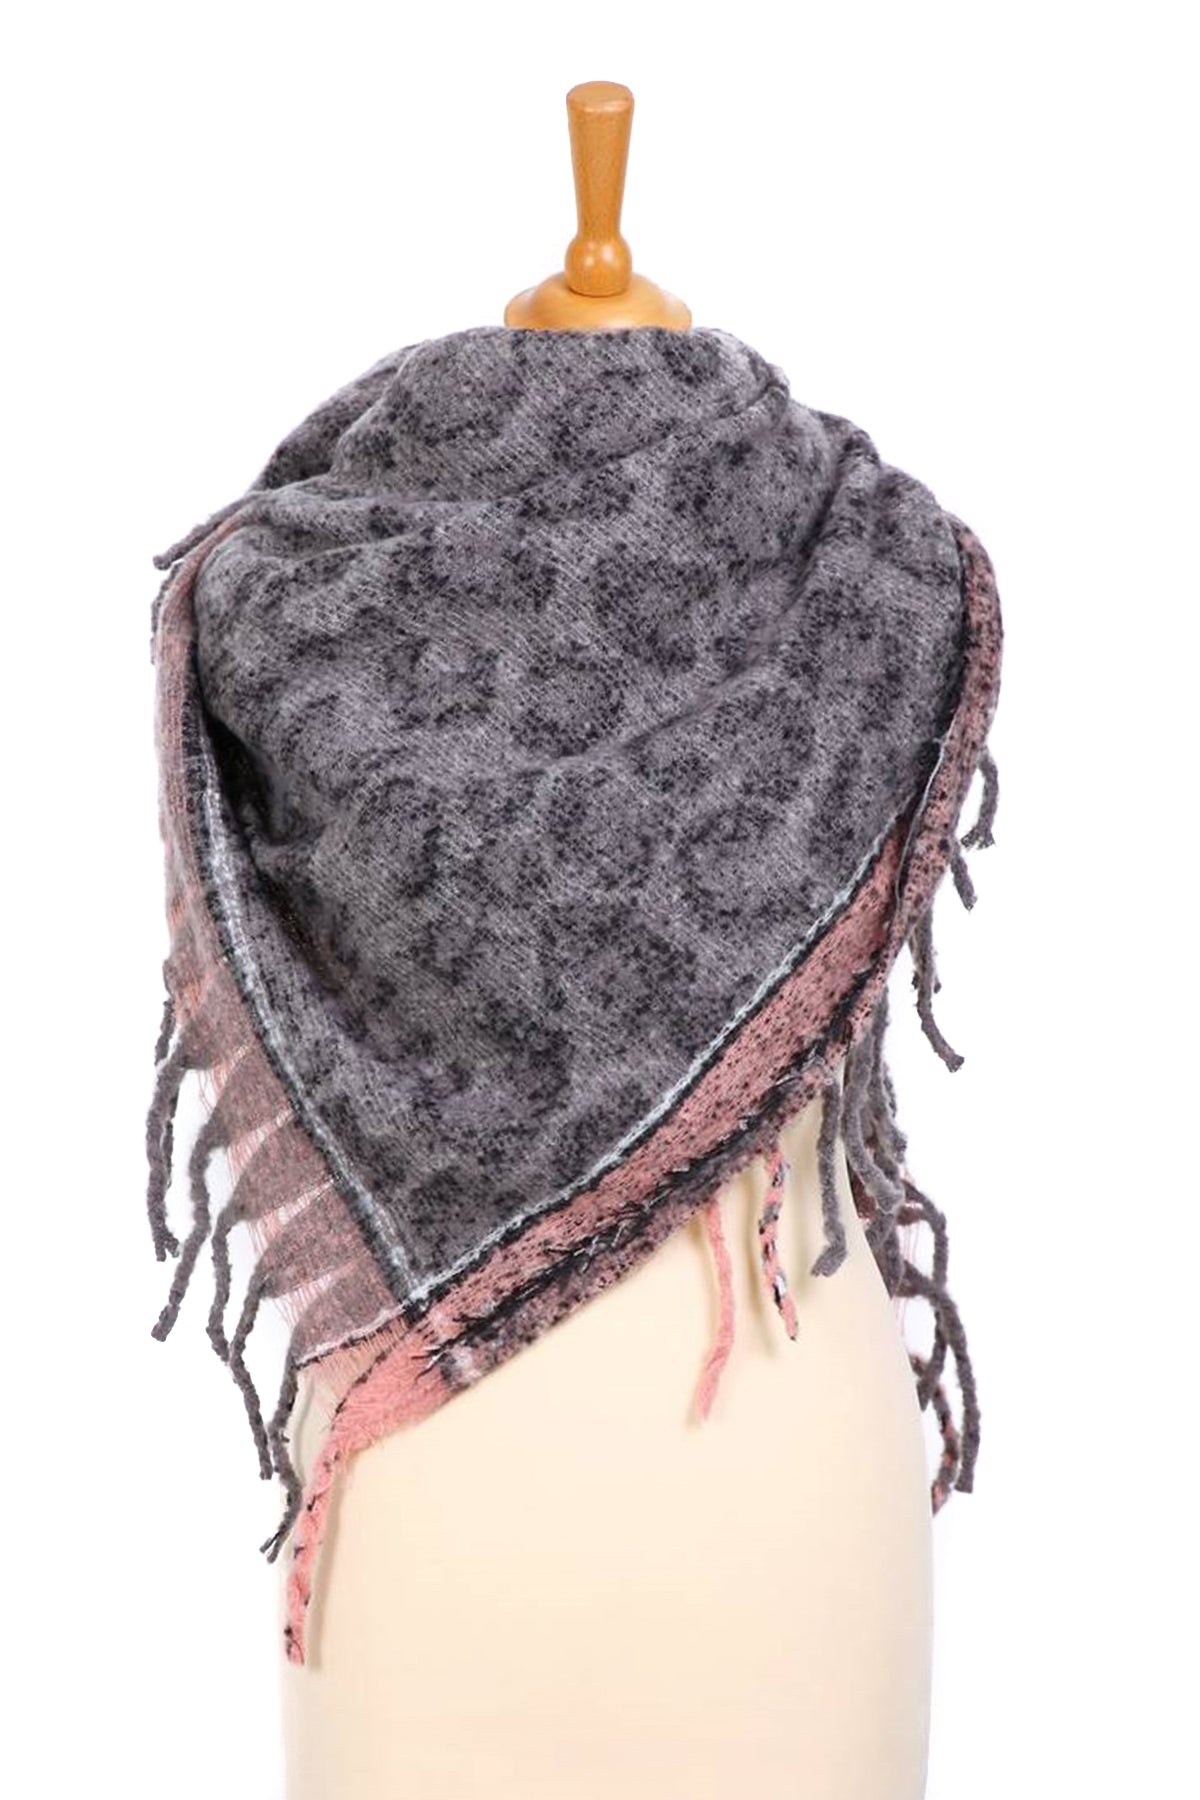 Grey Animal Print Square Scarf with Pink Border